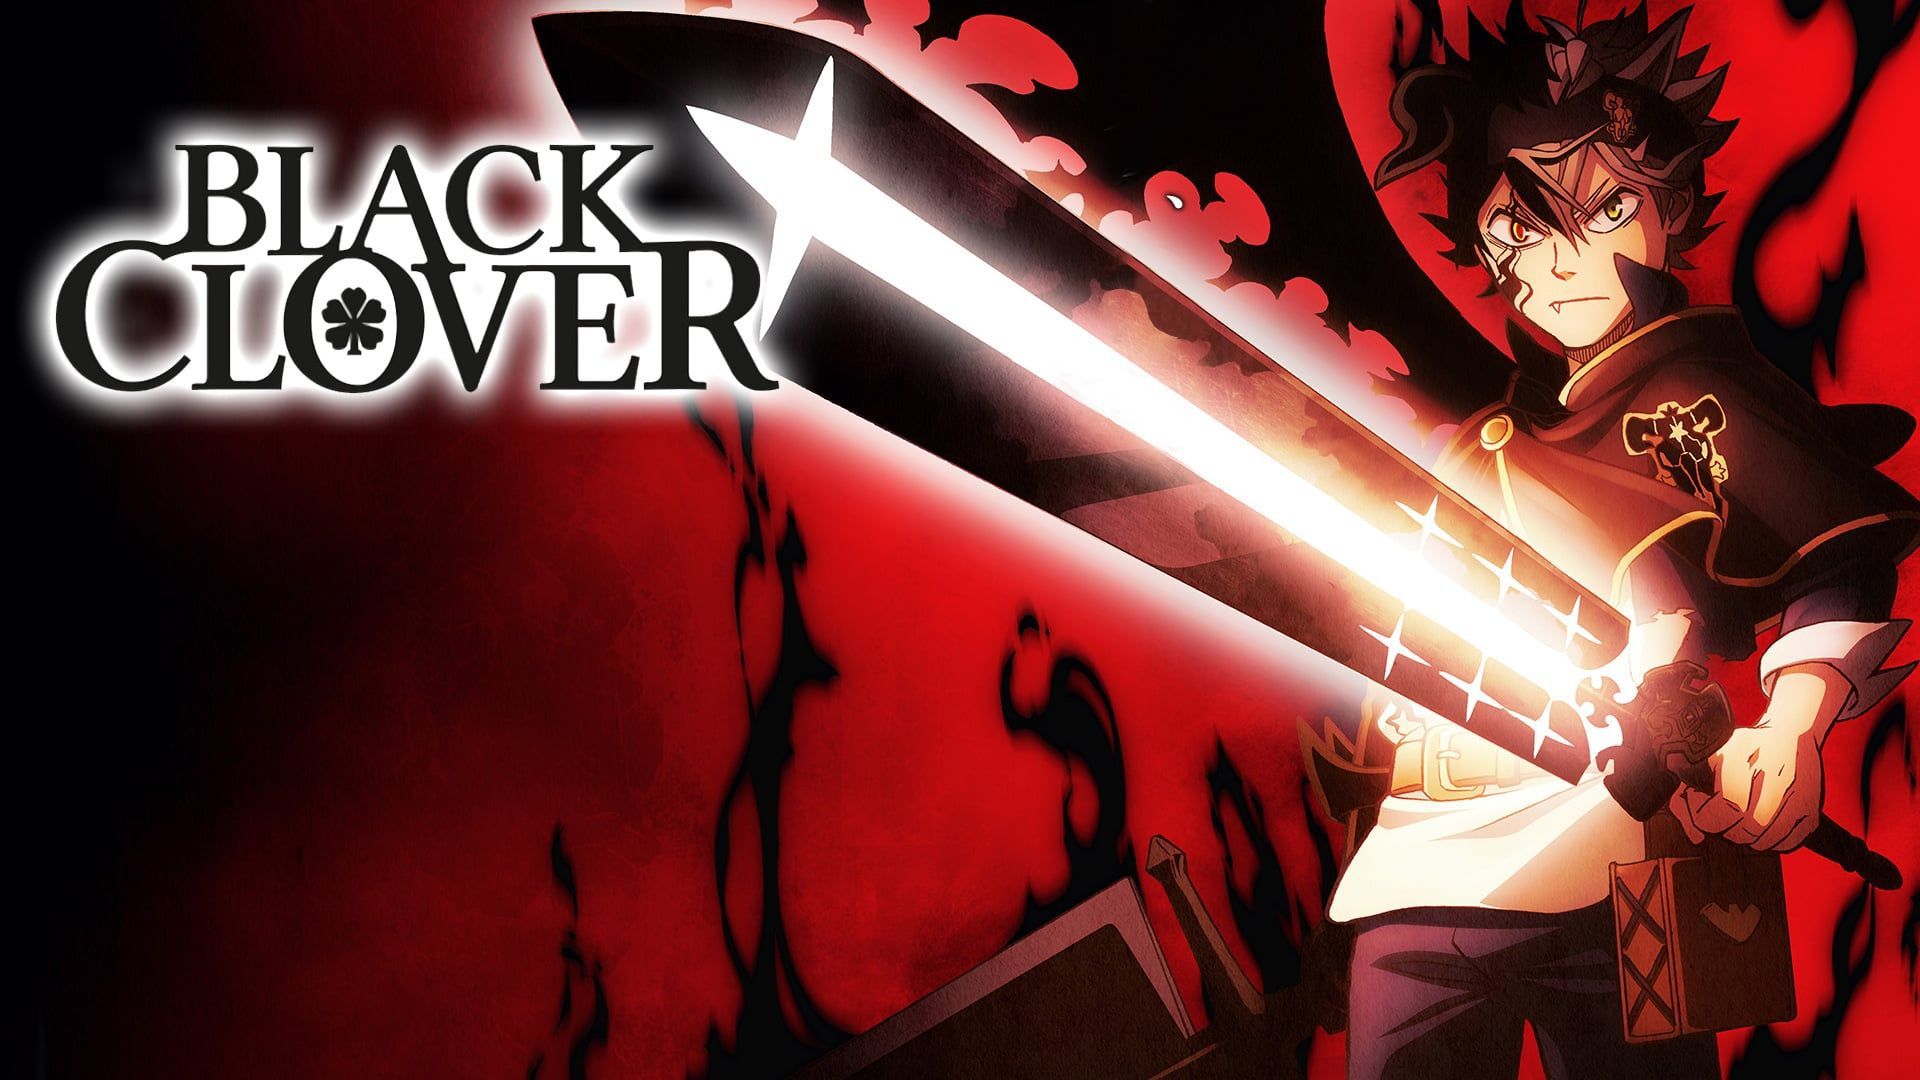 Black Clover Aesthetic Ps4 Wallpapers - Wallpaper Cave